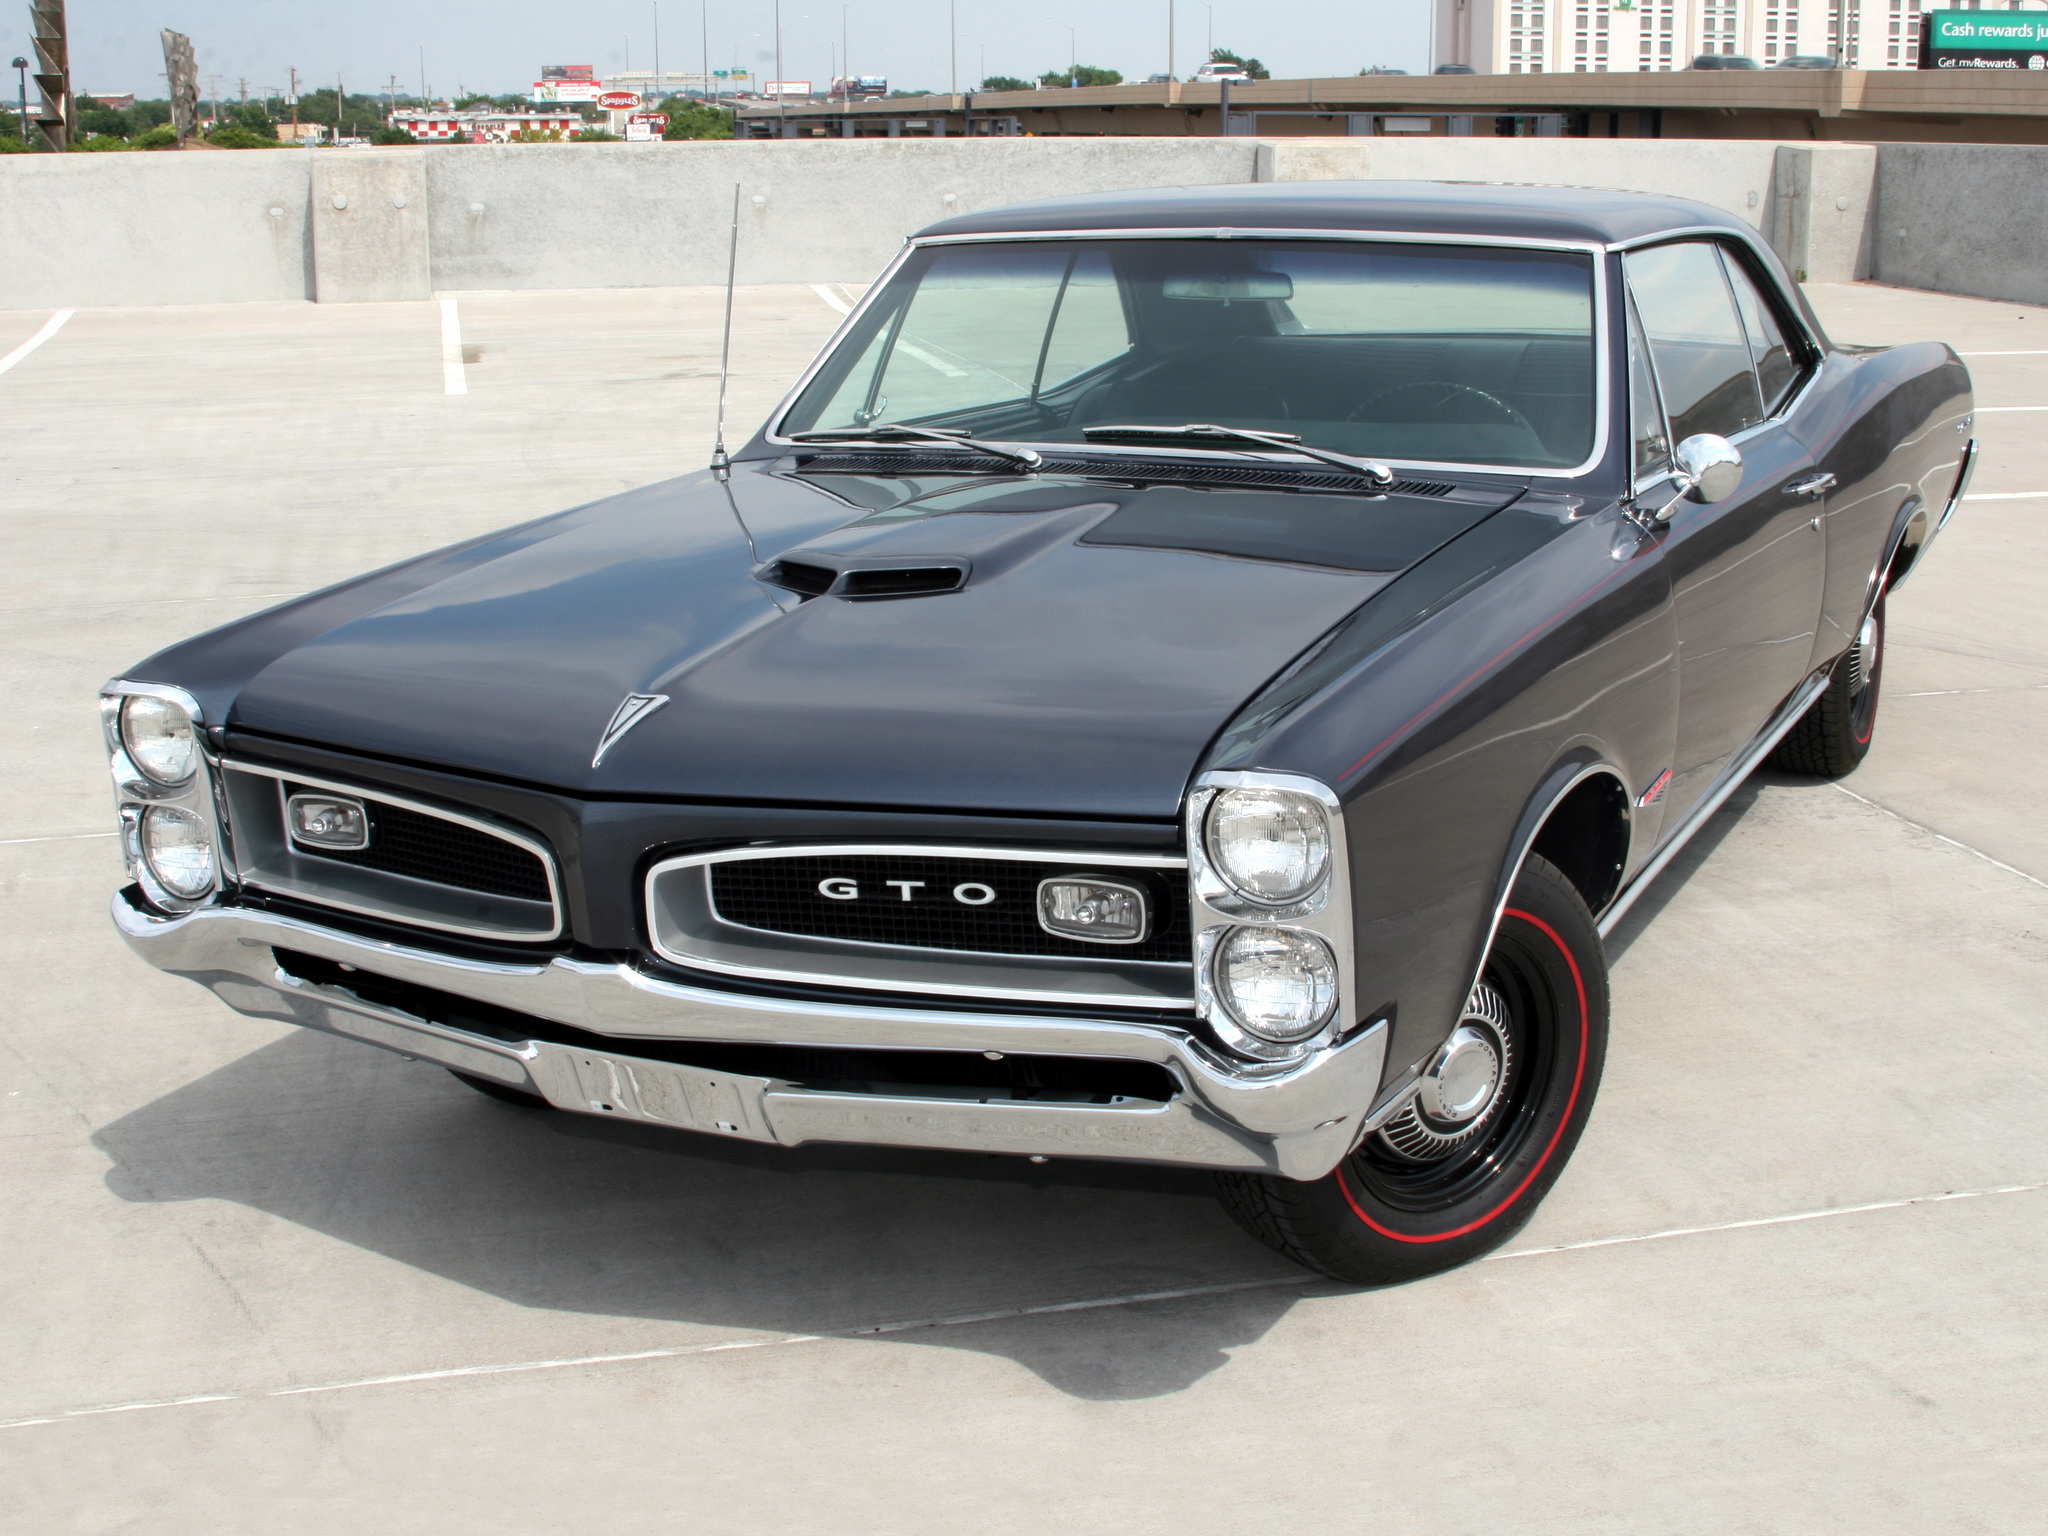 Pontiac Tempest Gto Hardtop Coupe Muscle Classic Wallpaper